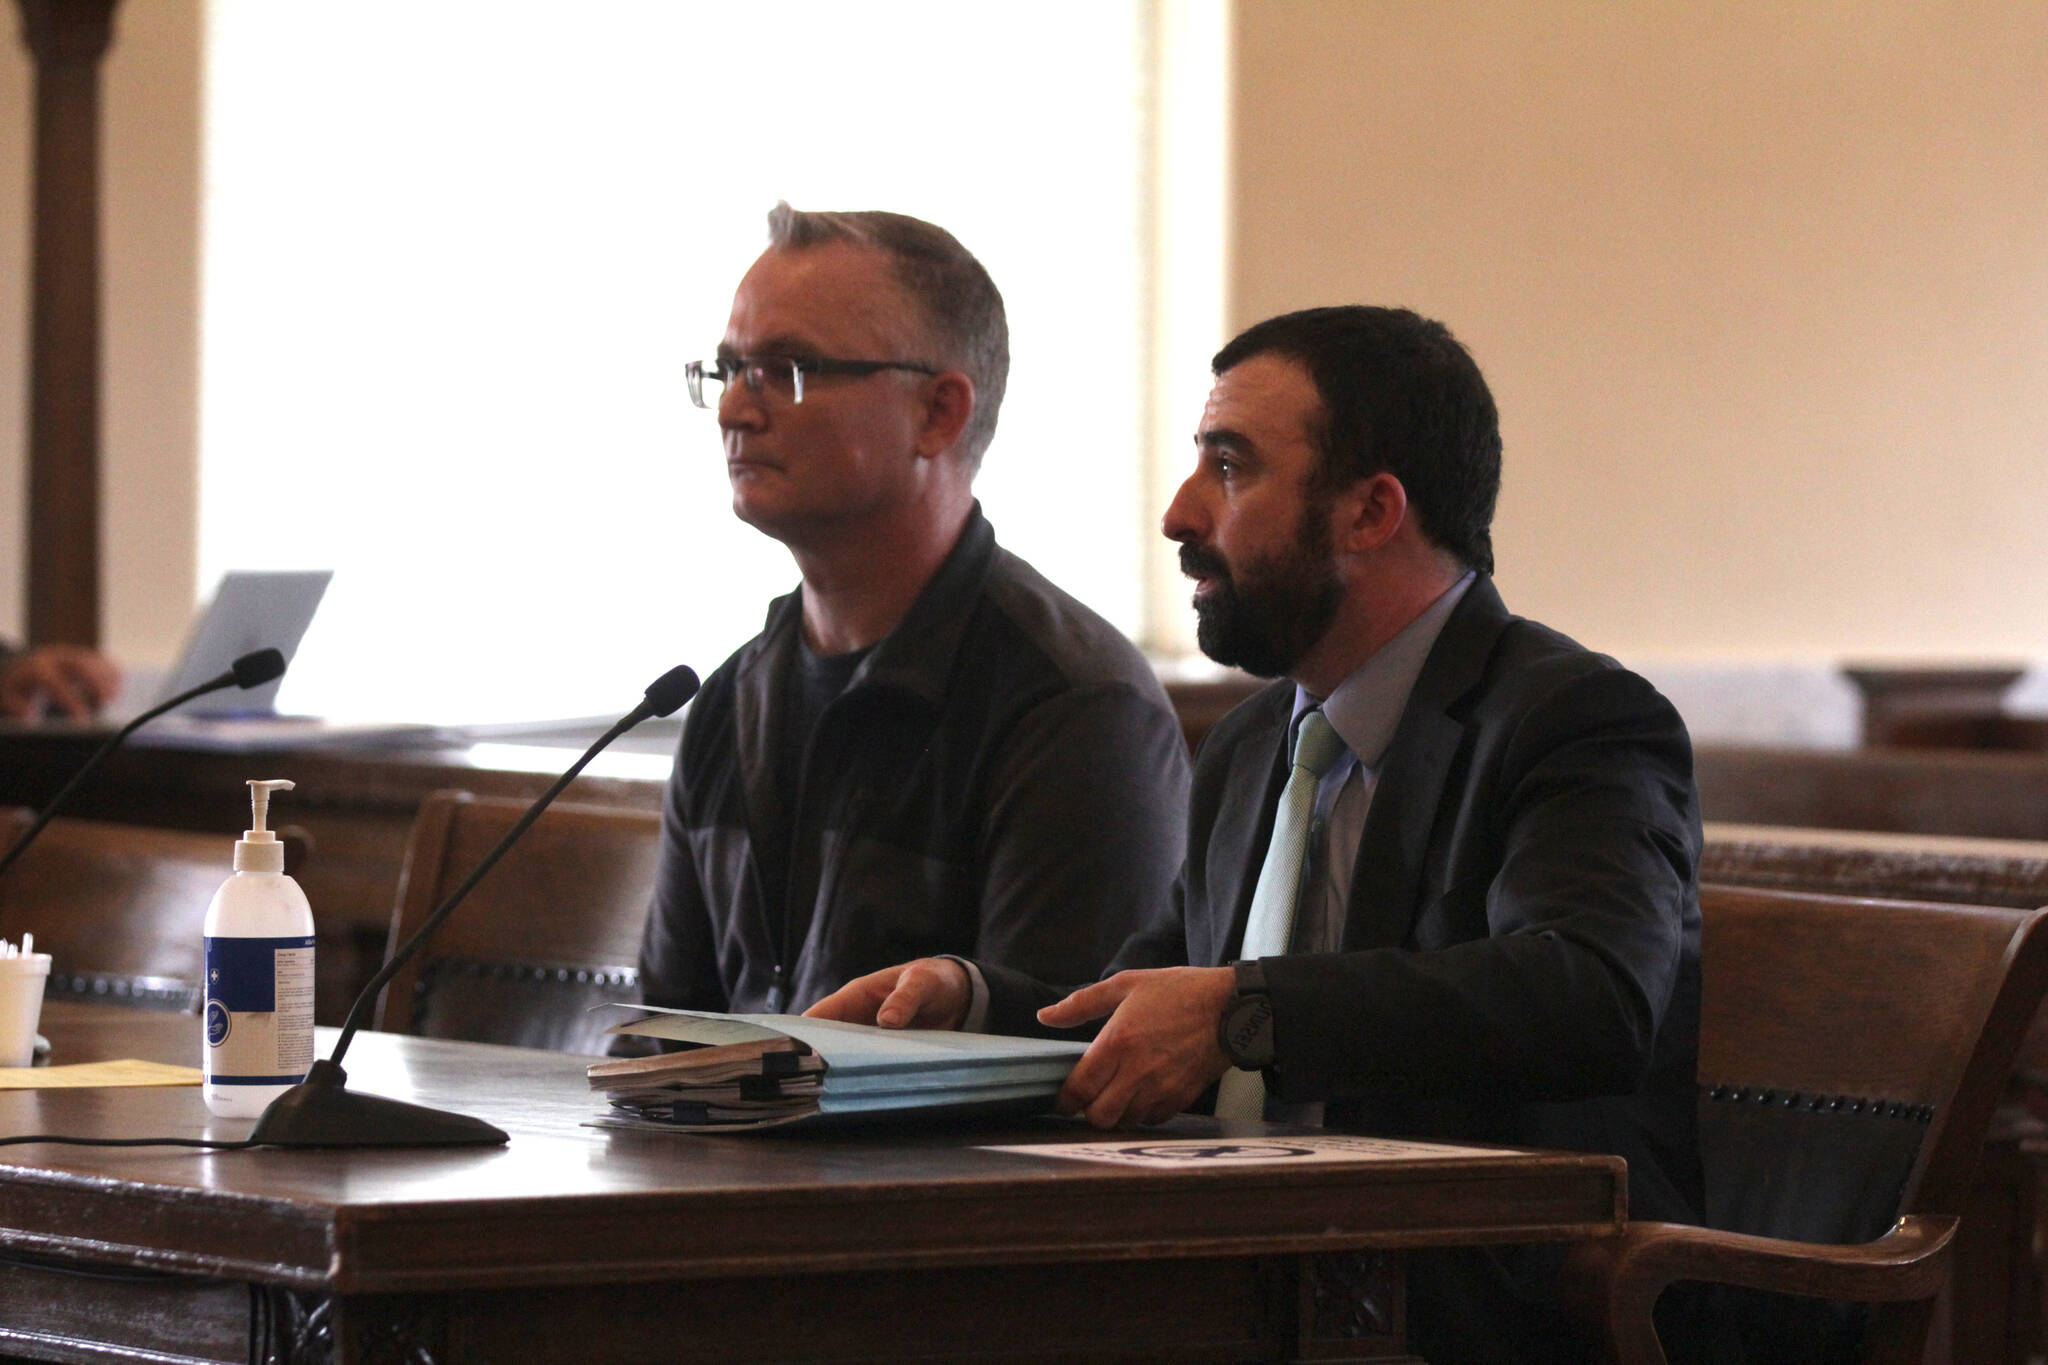 Wade Eric Iseminger, left, appears in his arraignment for multiple charges of child molestation, represented by Luke Laughlin, right, on May 8 in Grays Harbor County Superior Court. (Michael S. Lockett / The Daily World)